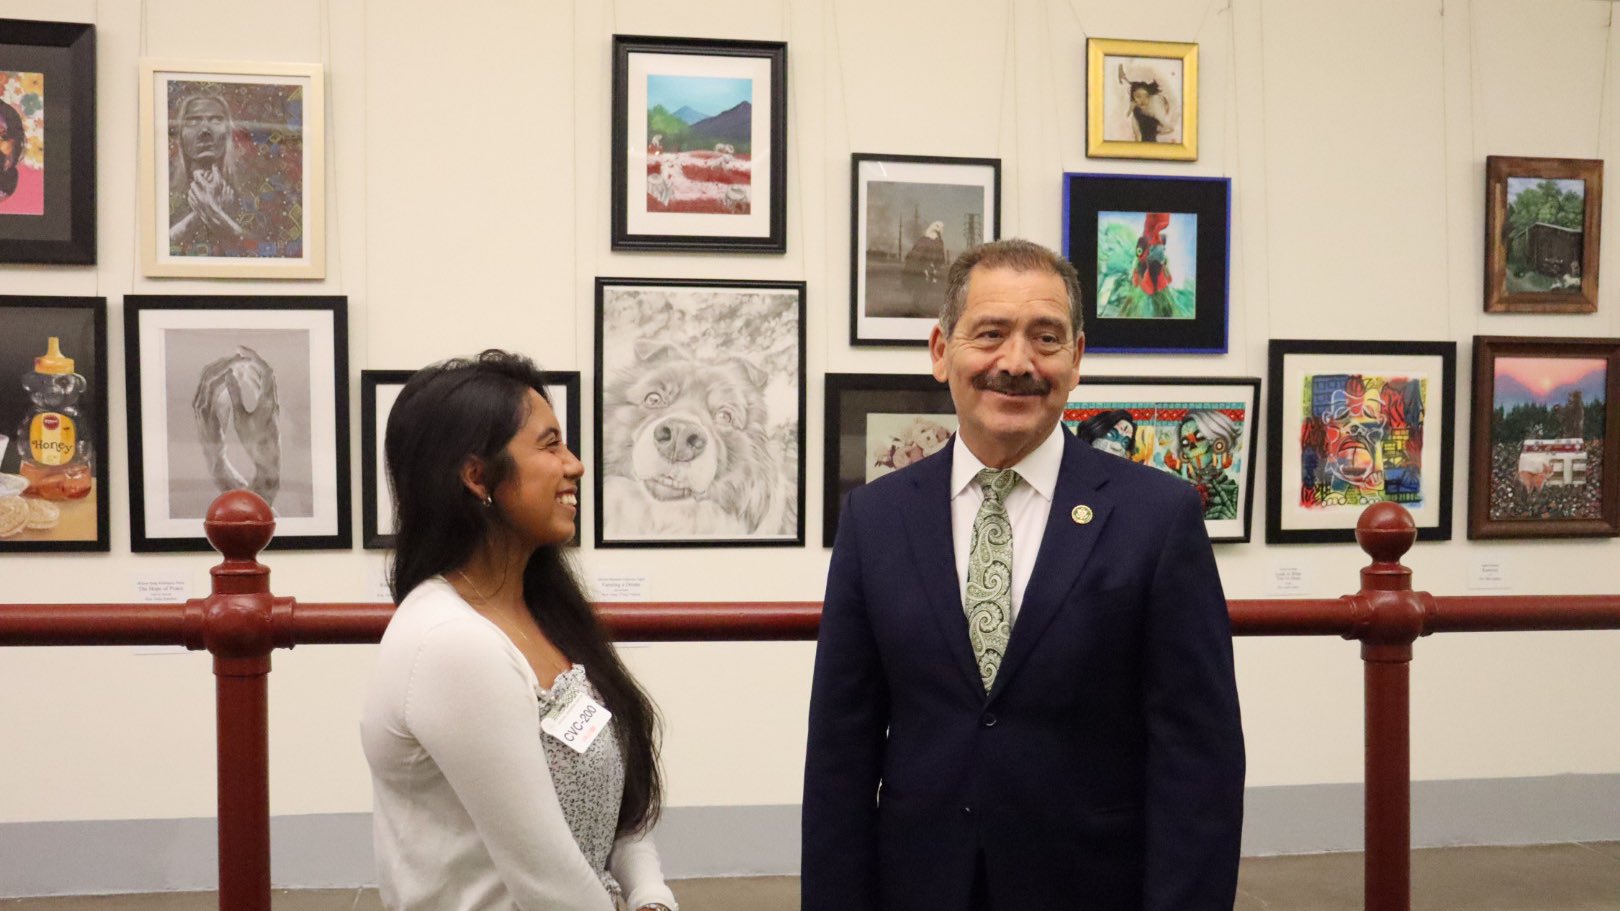 Congressman and Mariana smiling in front of her work